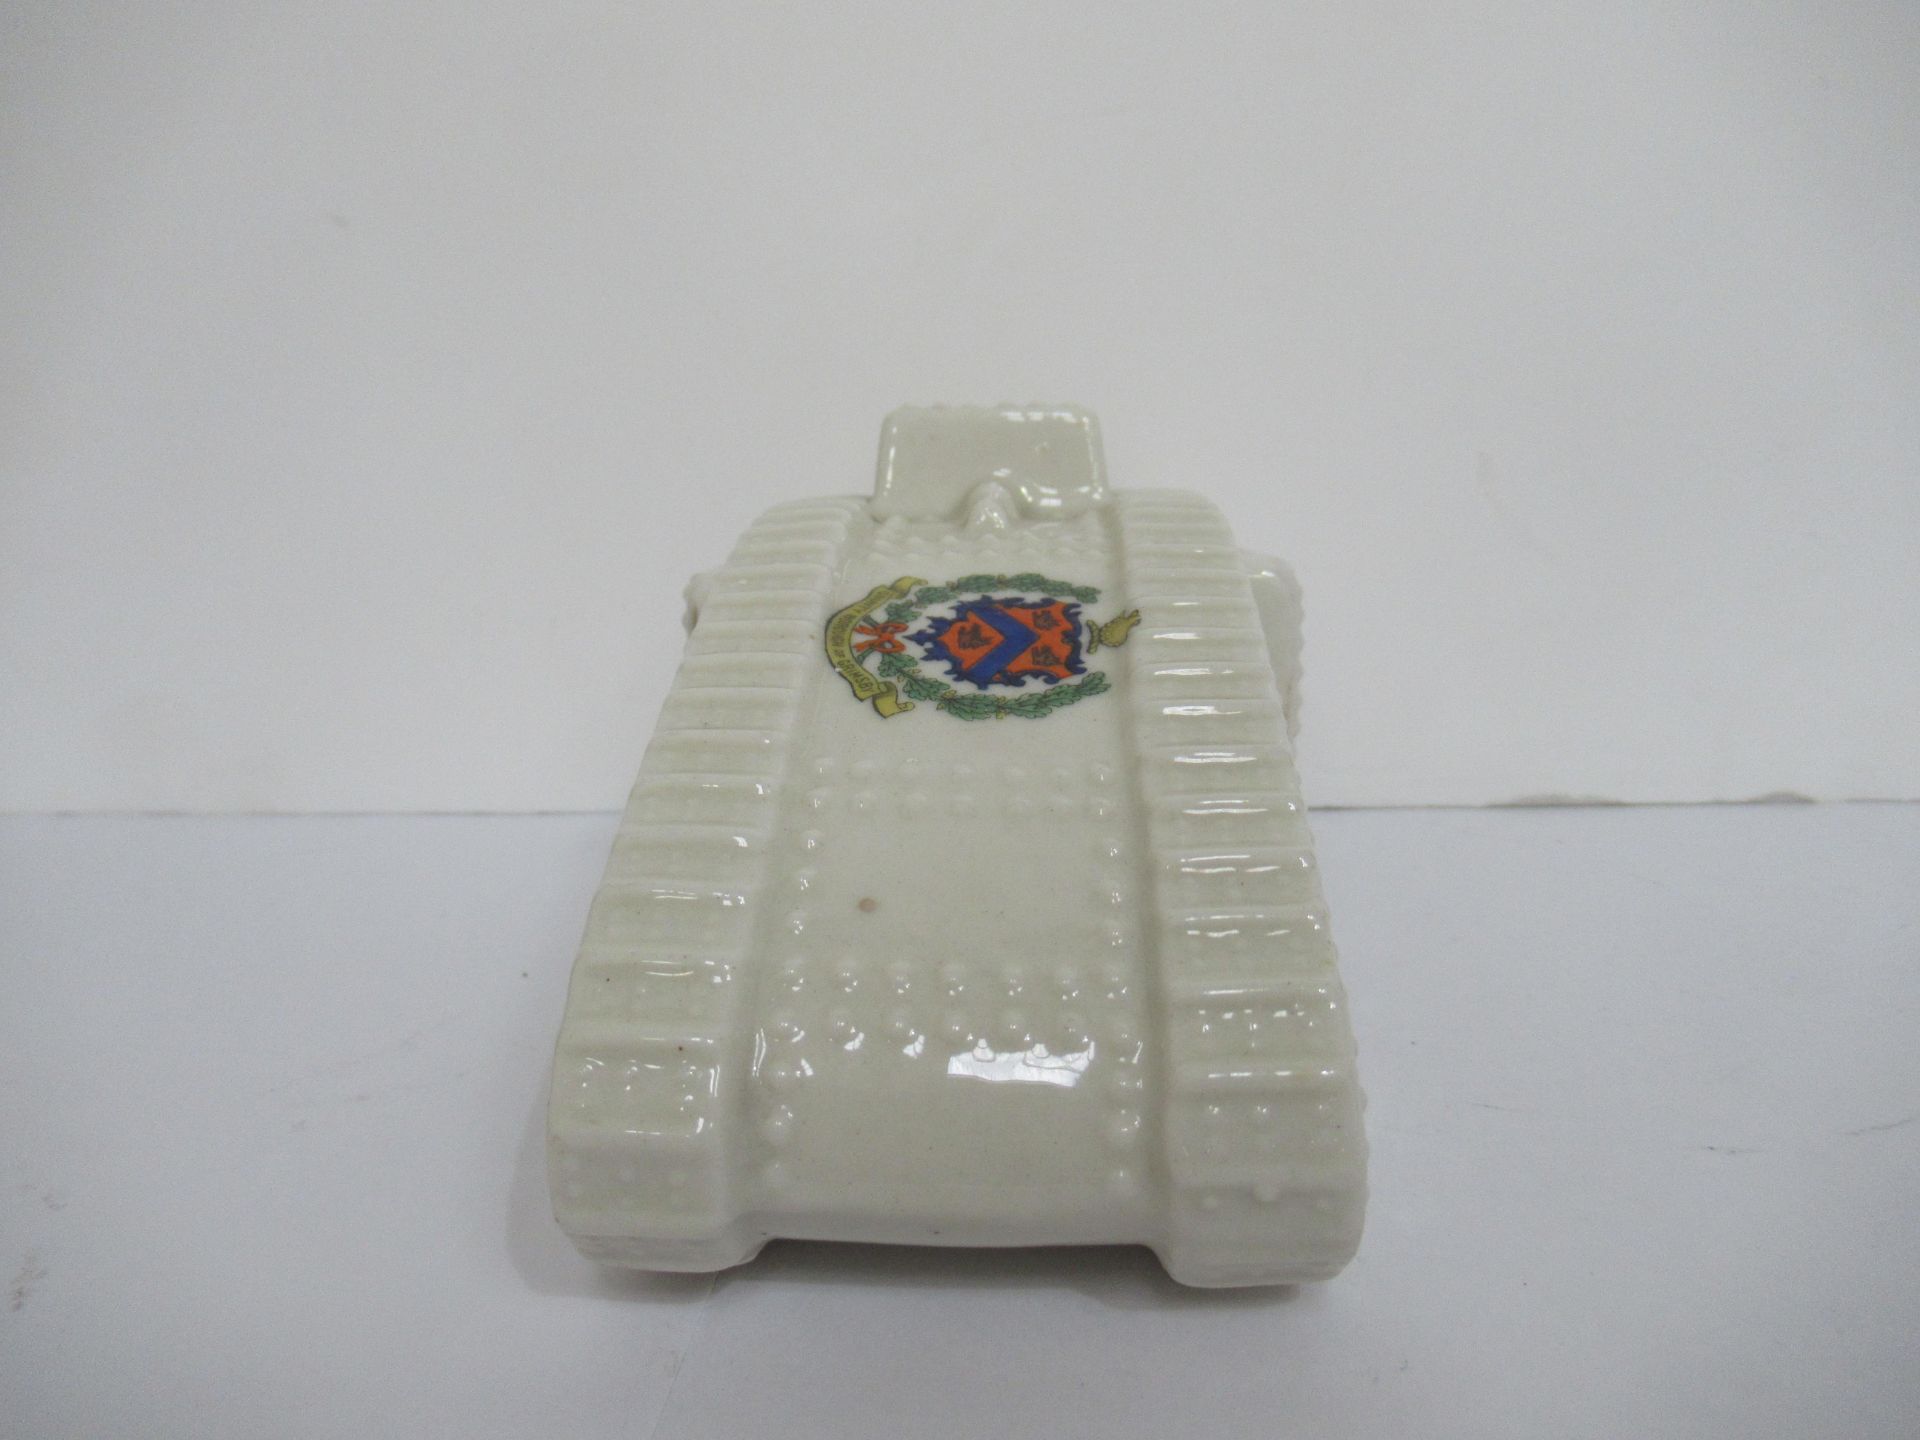 Crested China Arcadian model of tank with Grimsby coat of arms (90mm x 115mm) - Image 4 of 18